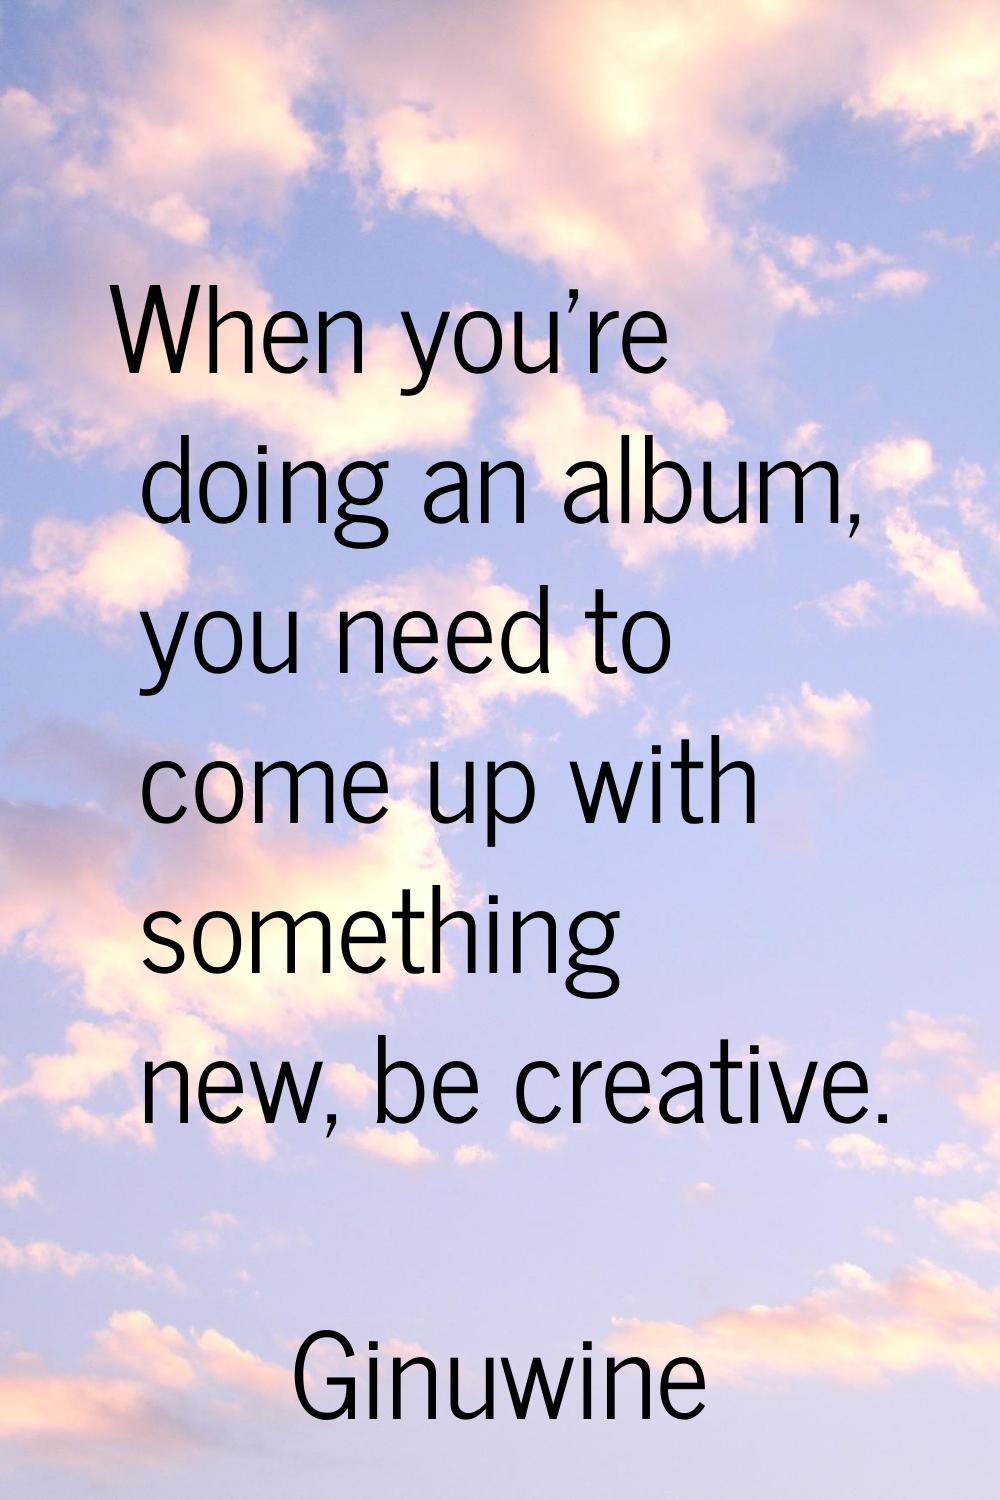 When you're doing an album, you need to come up with something new, be creative.